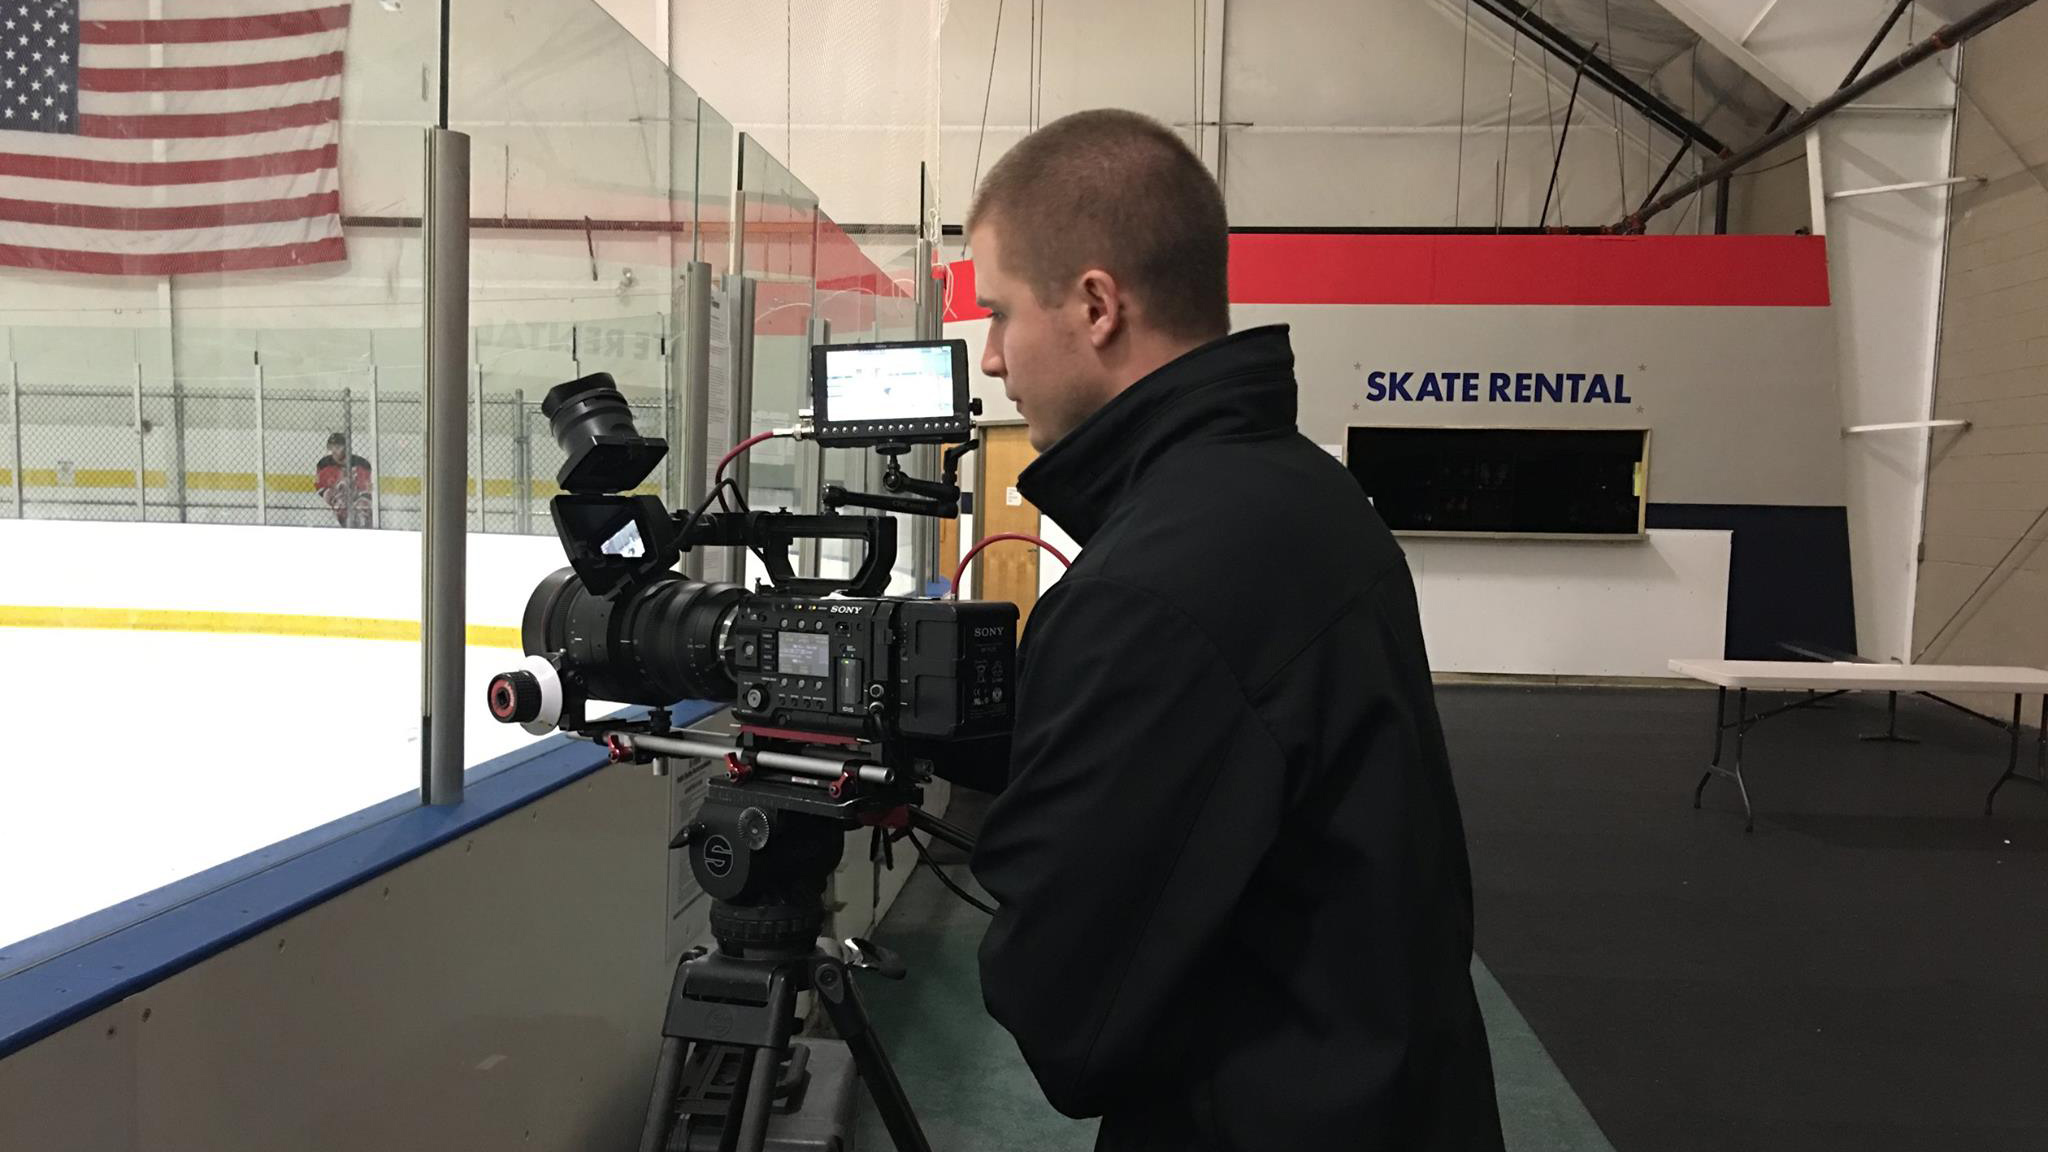 Male student shooting with large camera at an ice hockey rink with a sign that says "skate rental" in the background 